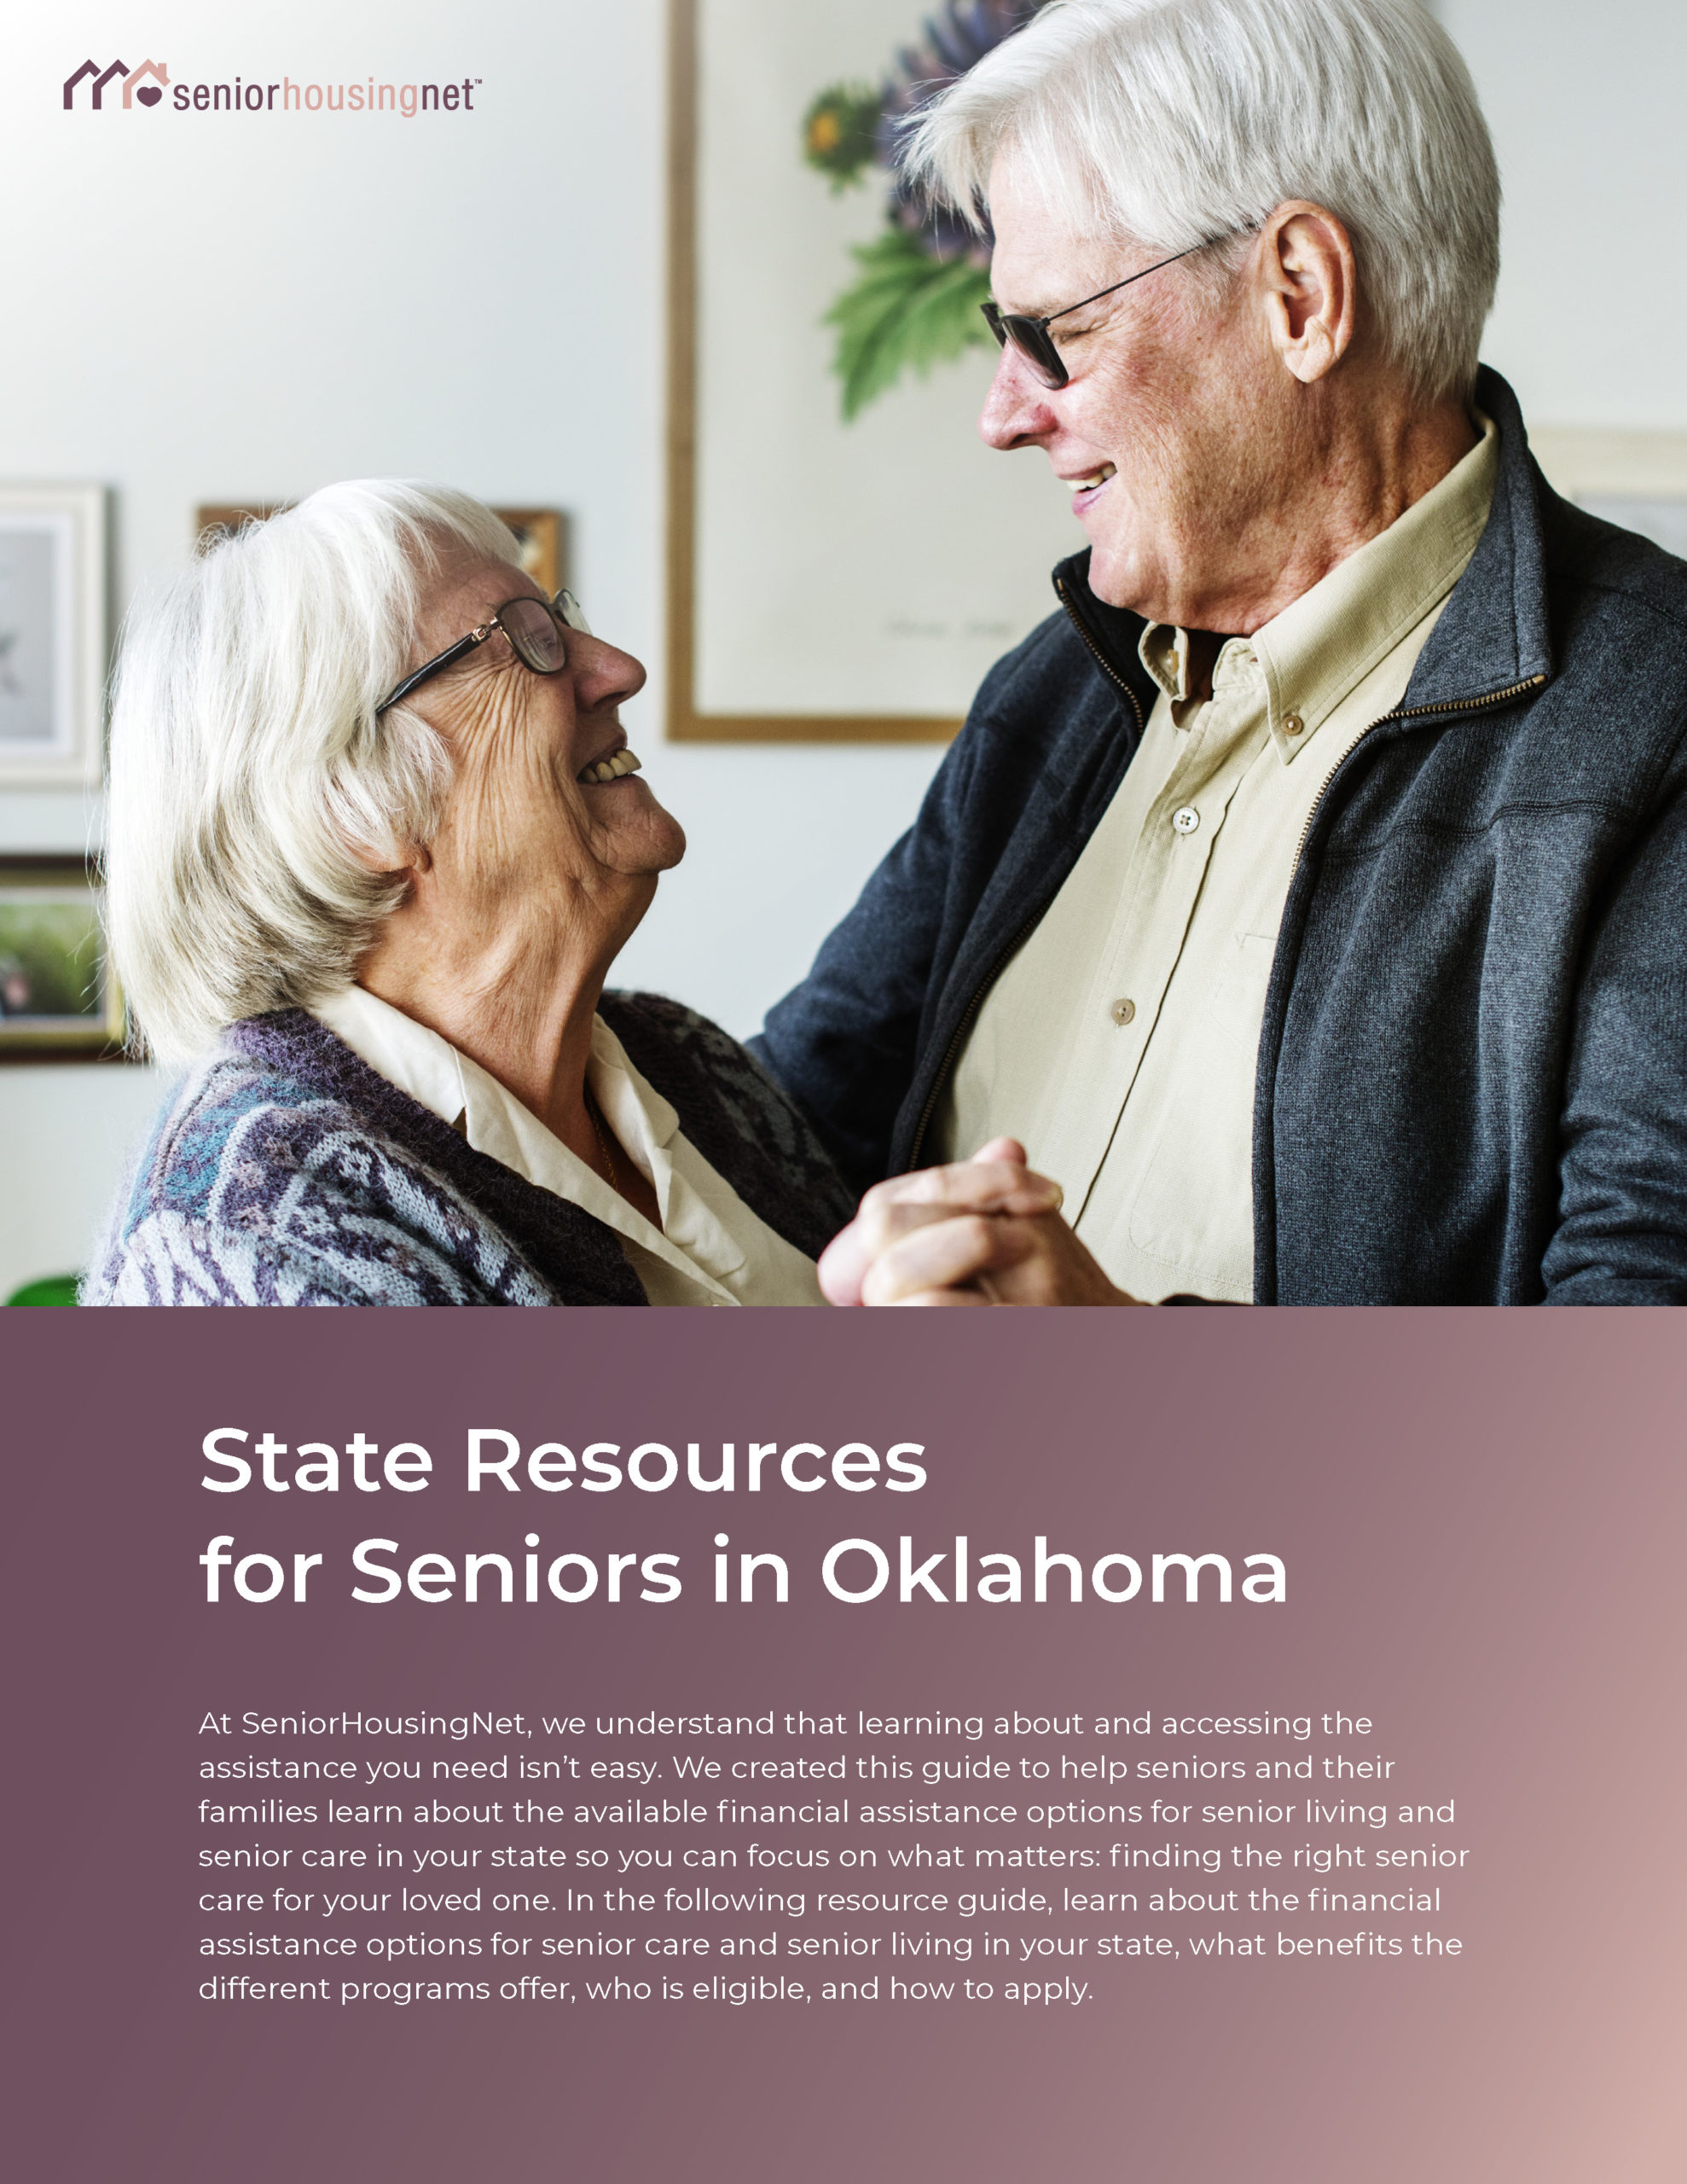 State Resources for Seniors in Oklahoma